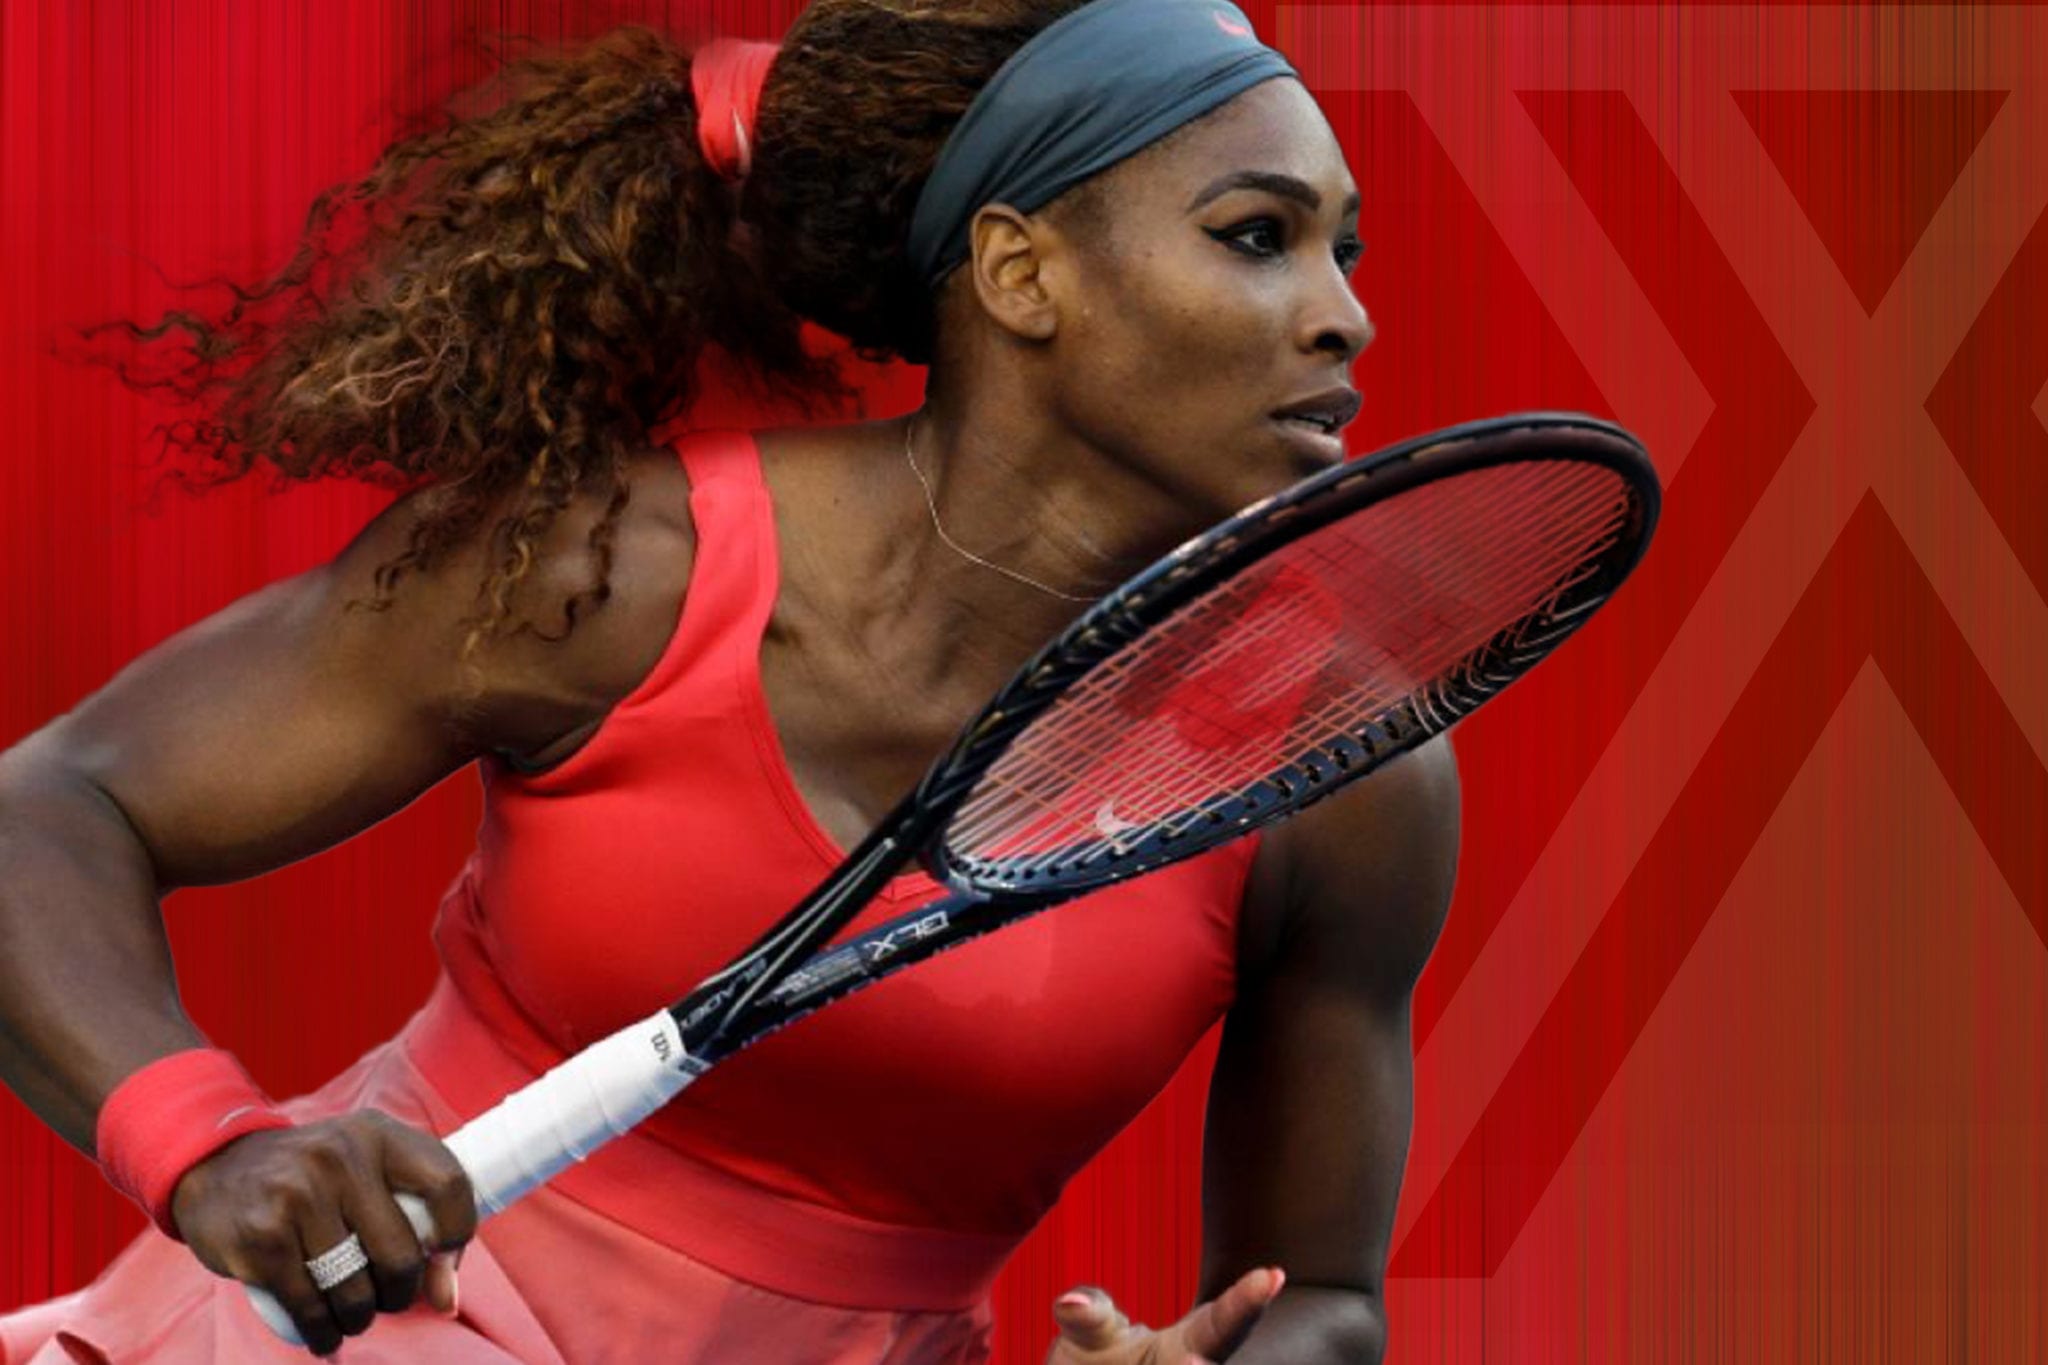 What Watch Does Serena Williams Wear?